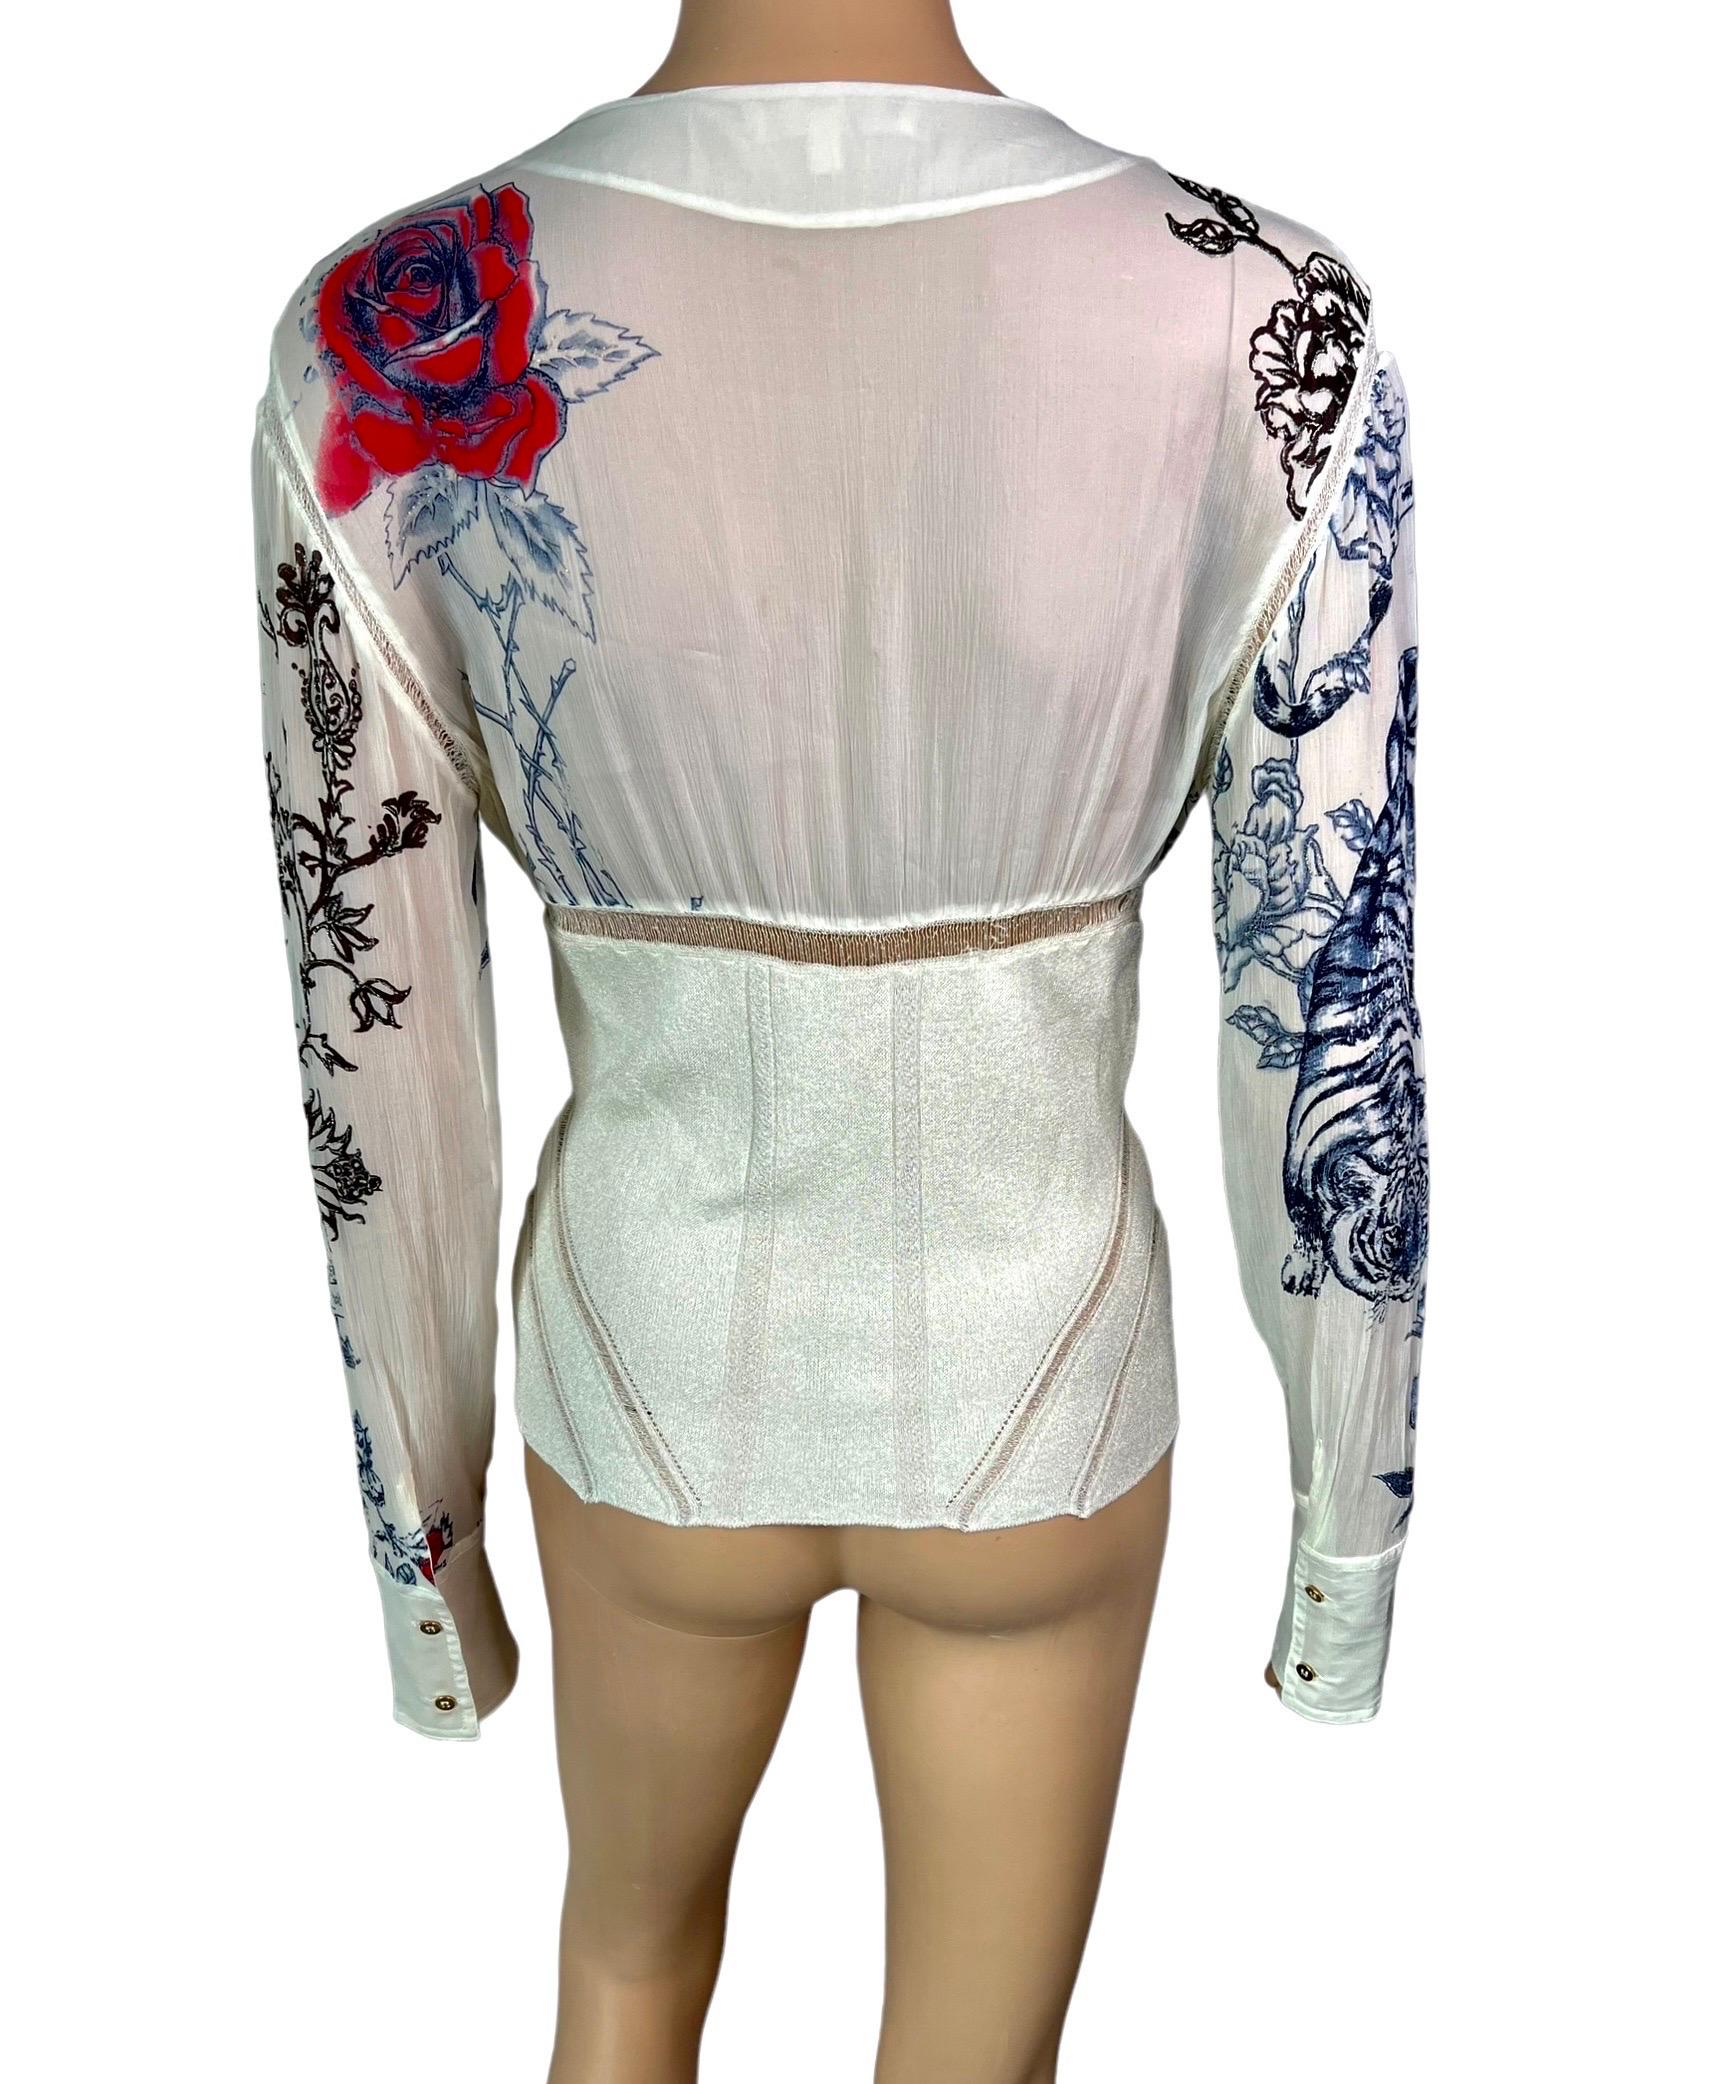 Roberto Cavalli S/S 2003 Tattoo Print Plunging Silk Knit Sheer Panels Blouse Top For Sale 2